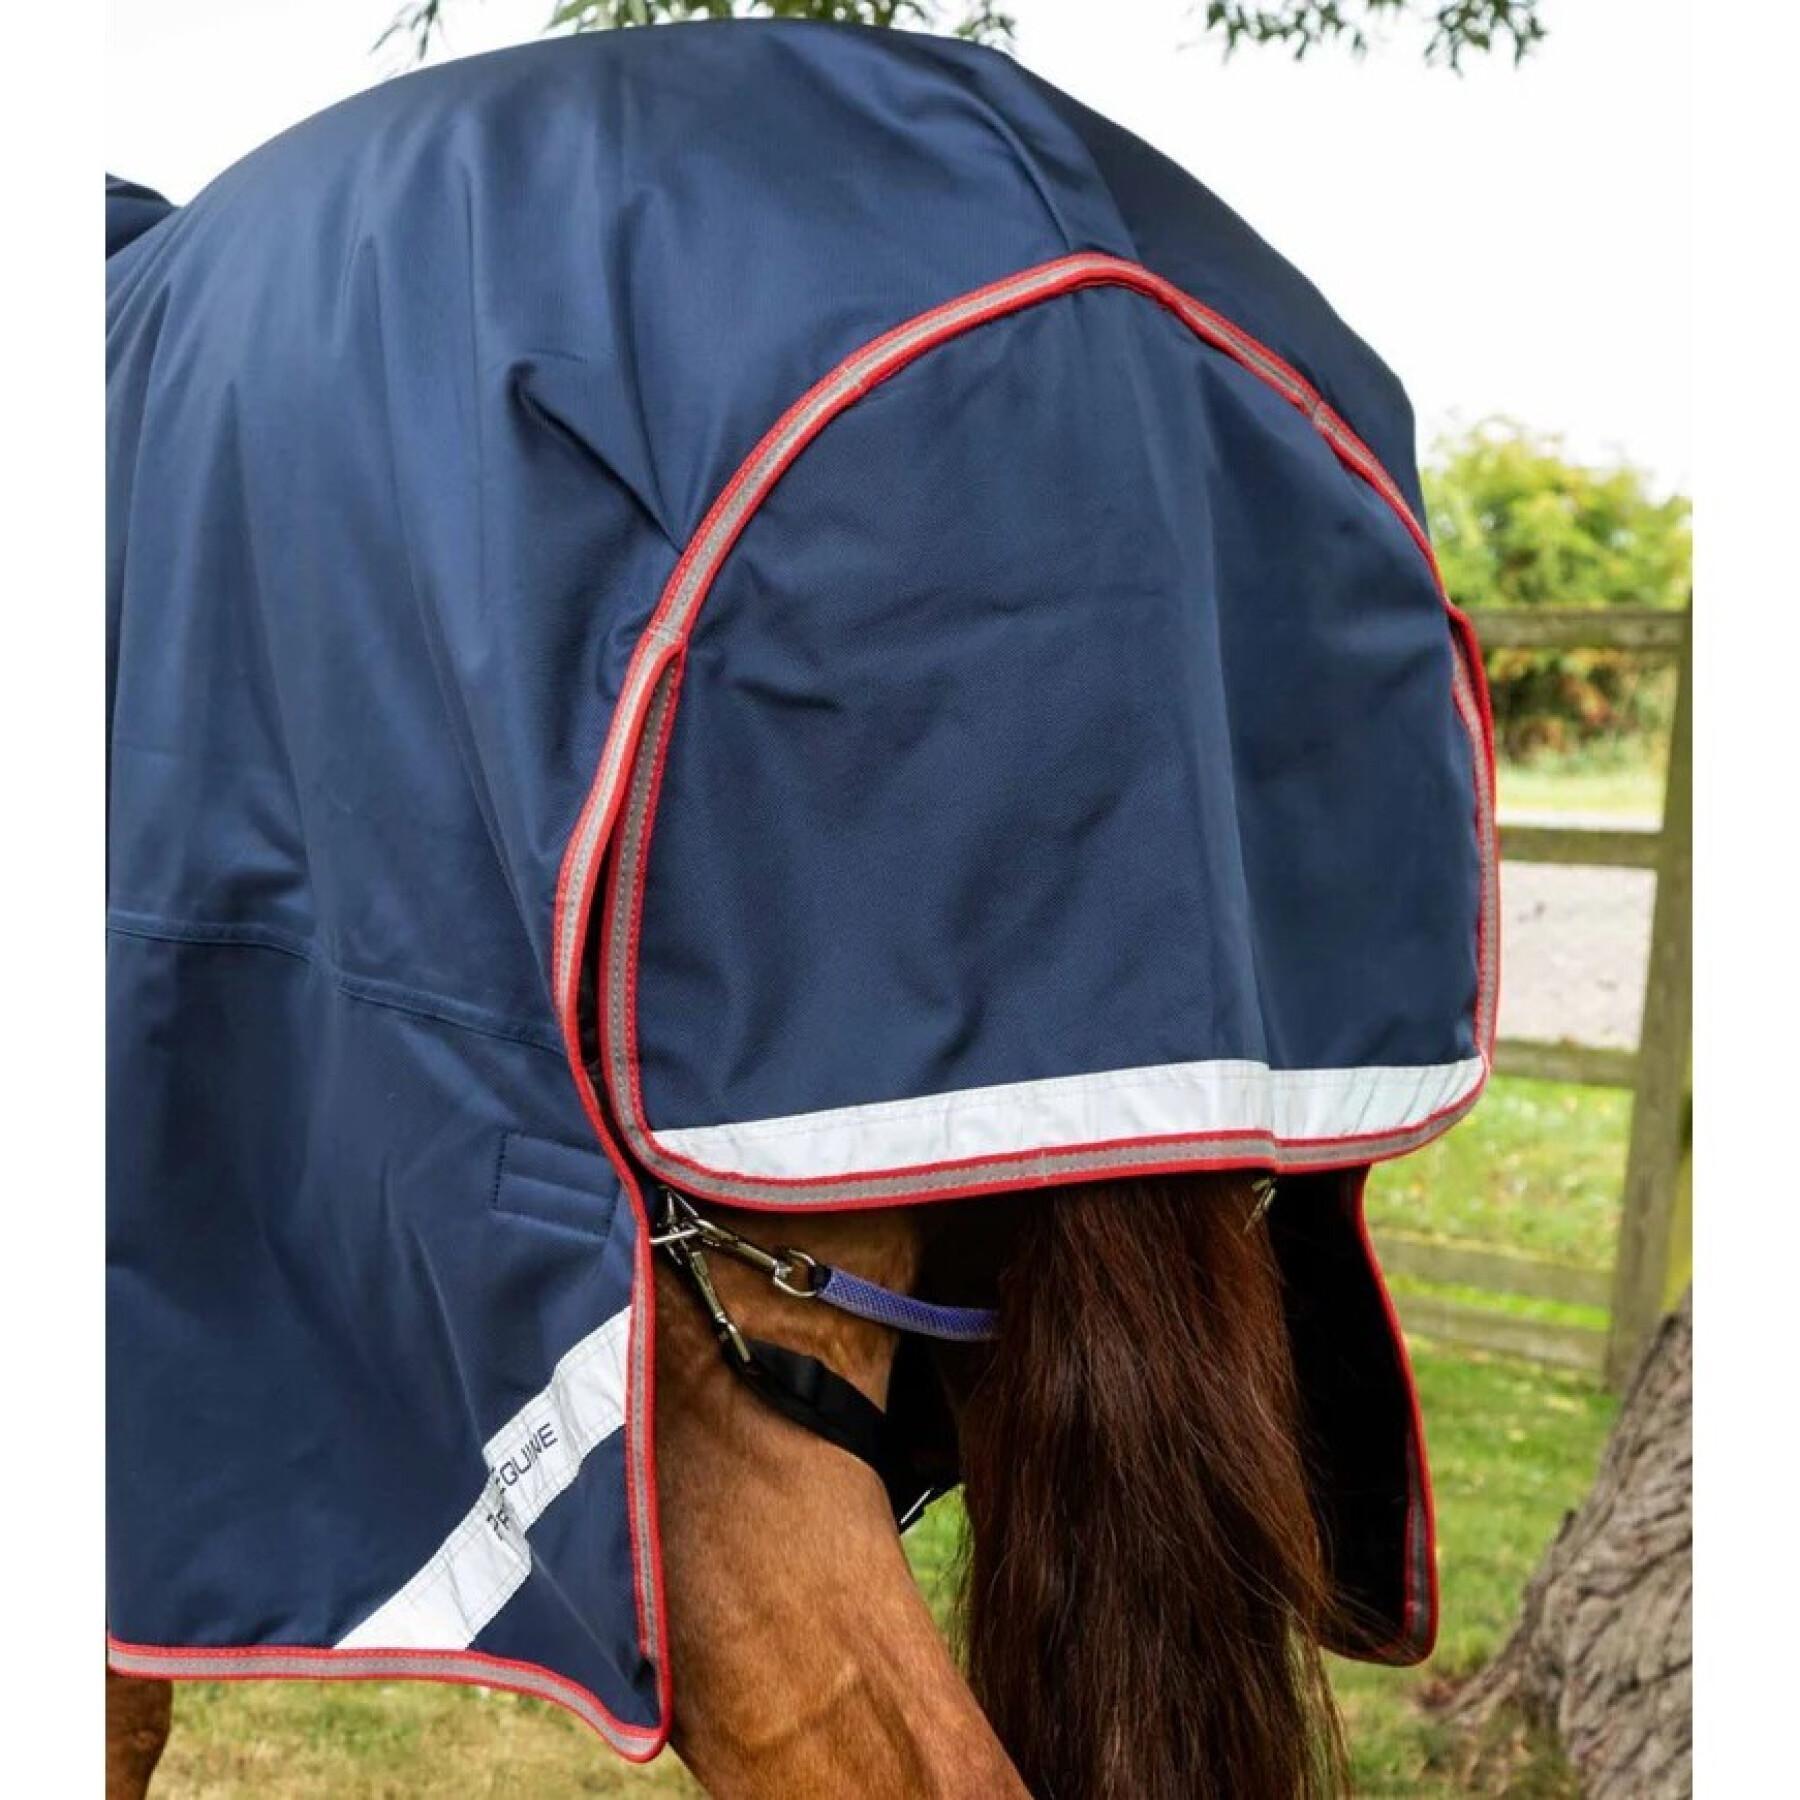 Outdoor horse blanket with neck cover Premier Equine Titan Trio Complete